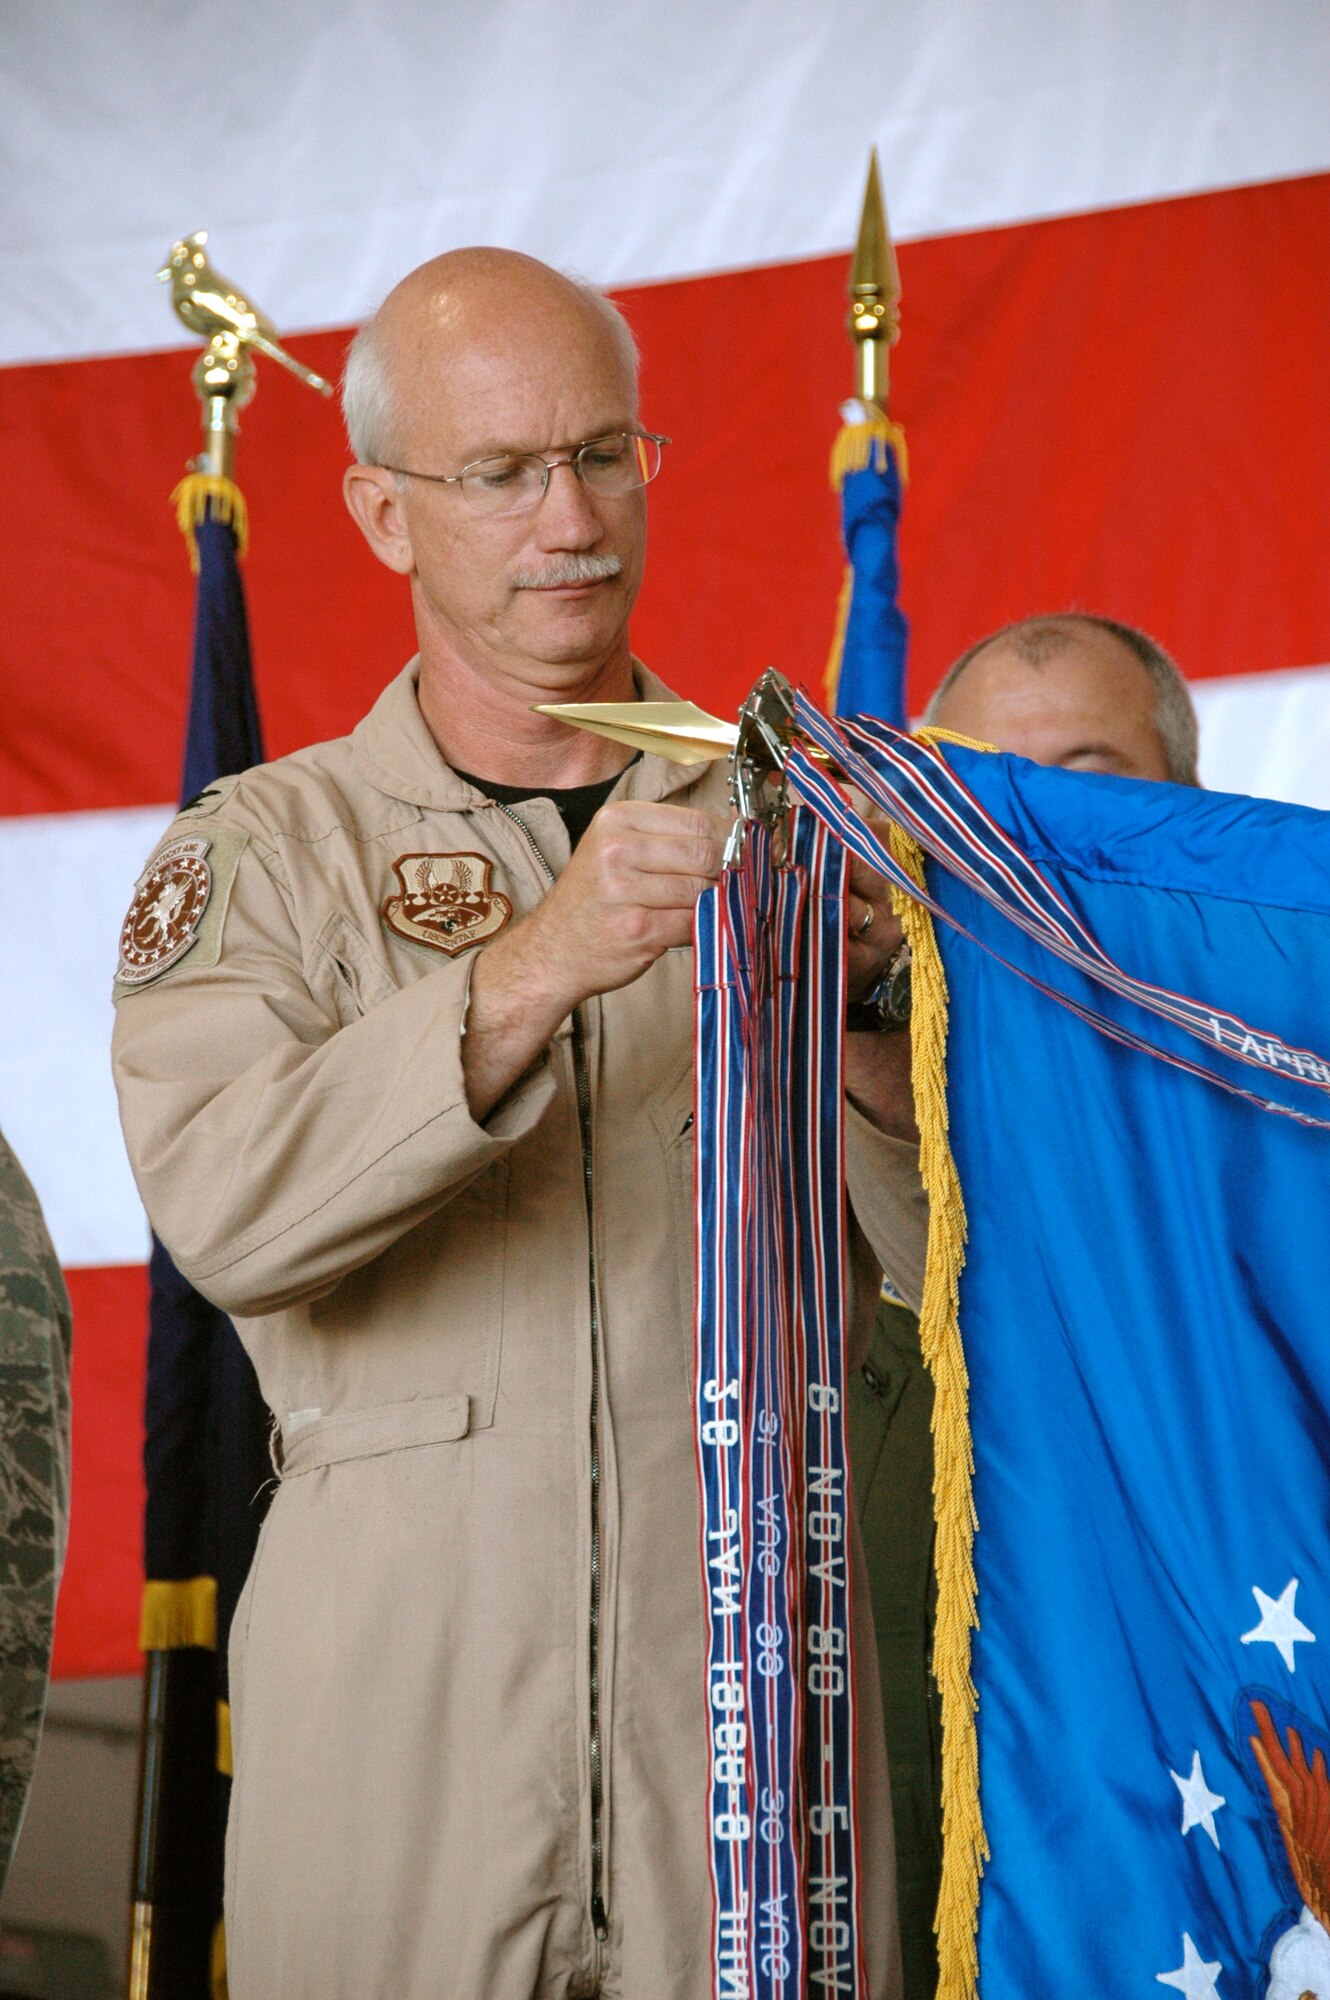 Col. Mark Kraus, commander of the Kentucky Air Guard’s 123rd Airlift Wing, attaches a 12th Air Force Outstanding Unit Award streamer to the wing’s colors during a Sept. 16 awards ceremony held in the base Fuel Cell Hangar.

The honor recognizes the wing’s achievements from March 6, 2003 to March 15, 2004, when unit personnel deployed around the world for combat and combat support operations in the Global War on Terror, Operation Iraqi Freedom and Operation Enduring Freedom. (Capt. Dale Greer/KyANG)